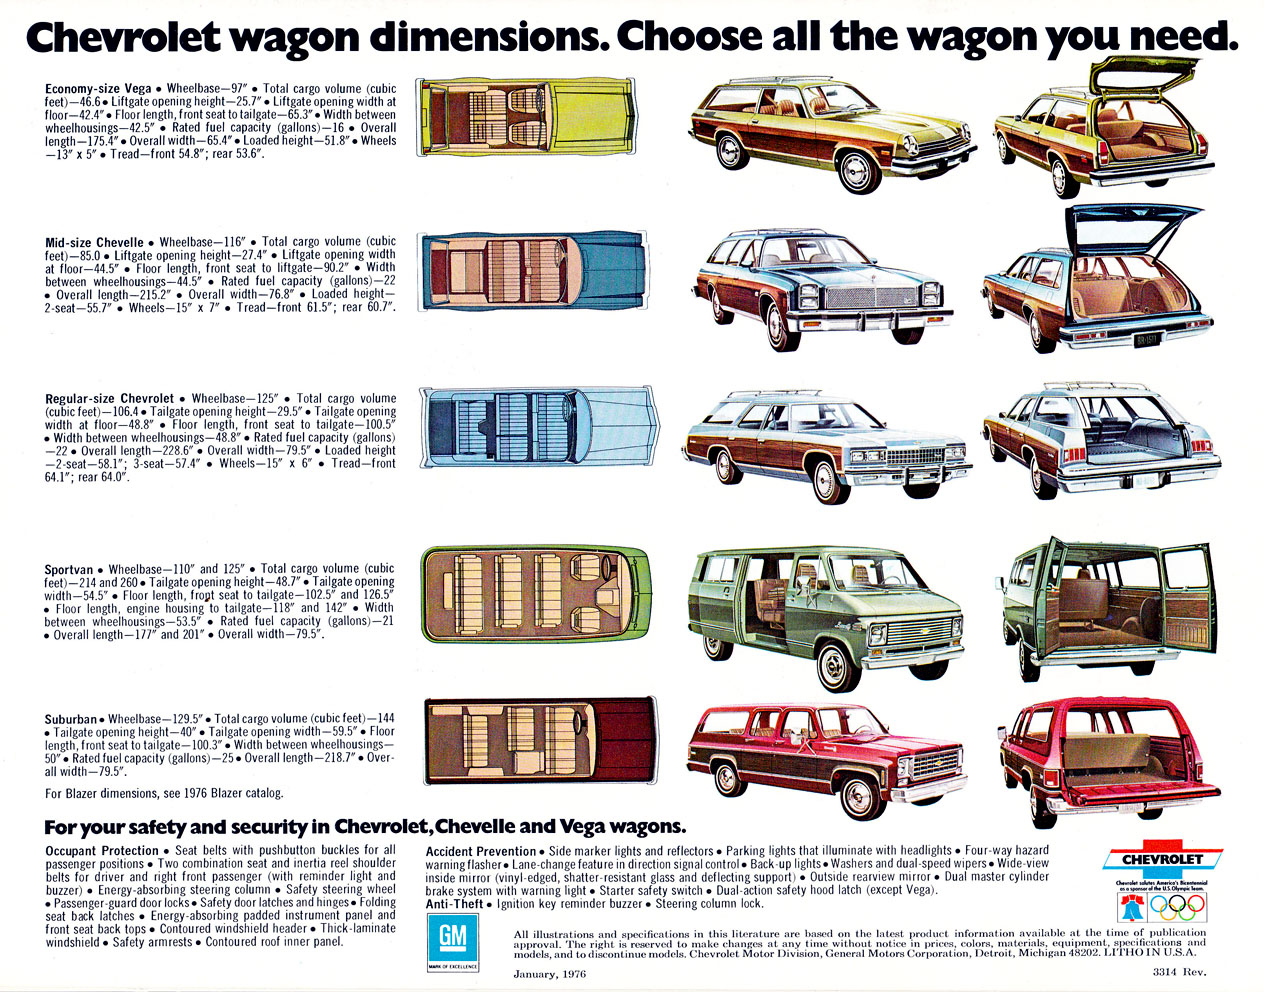 1976 Chevrolet Wagons Brochure Page 7